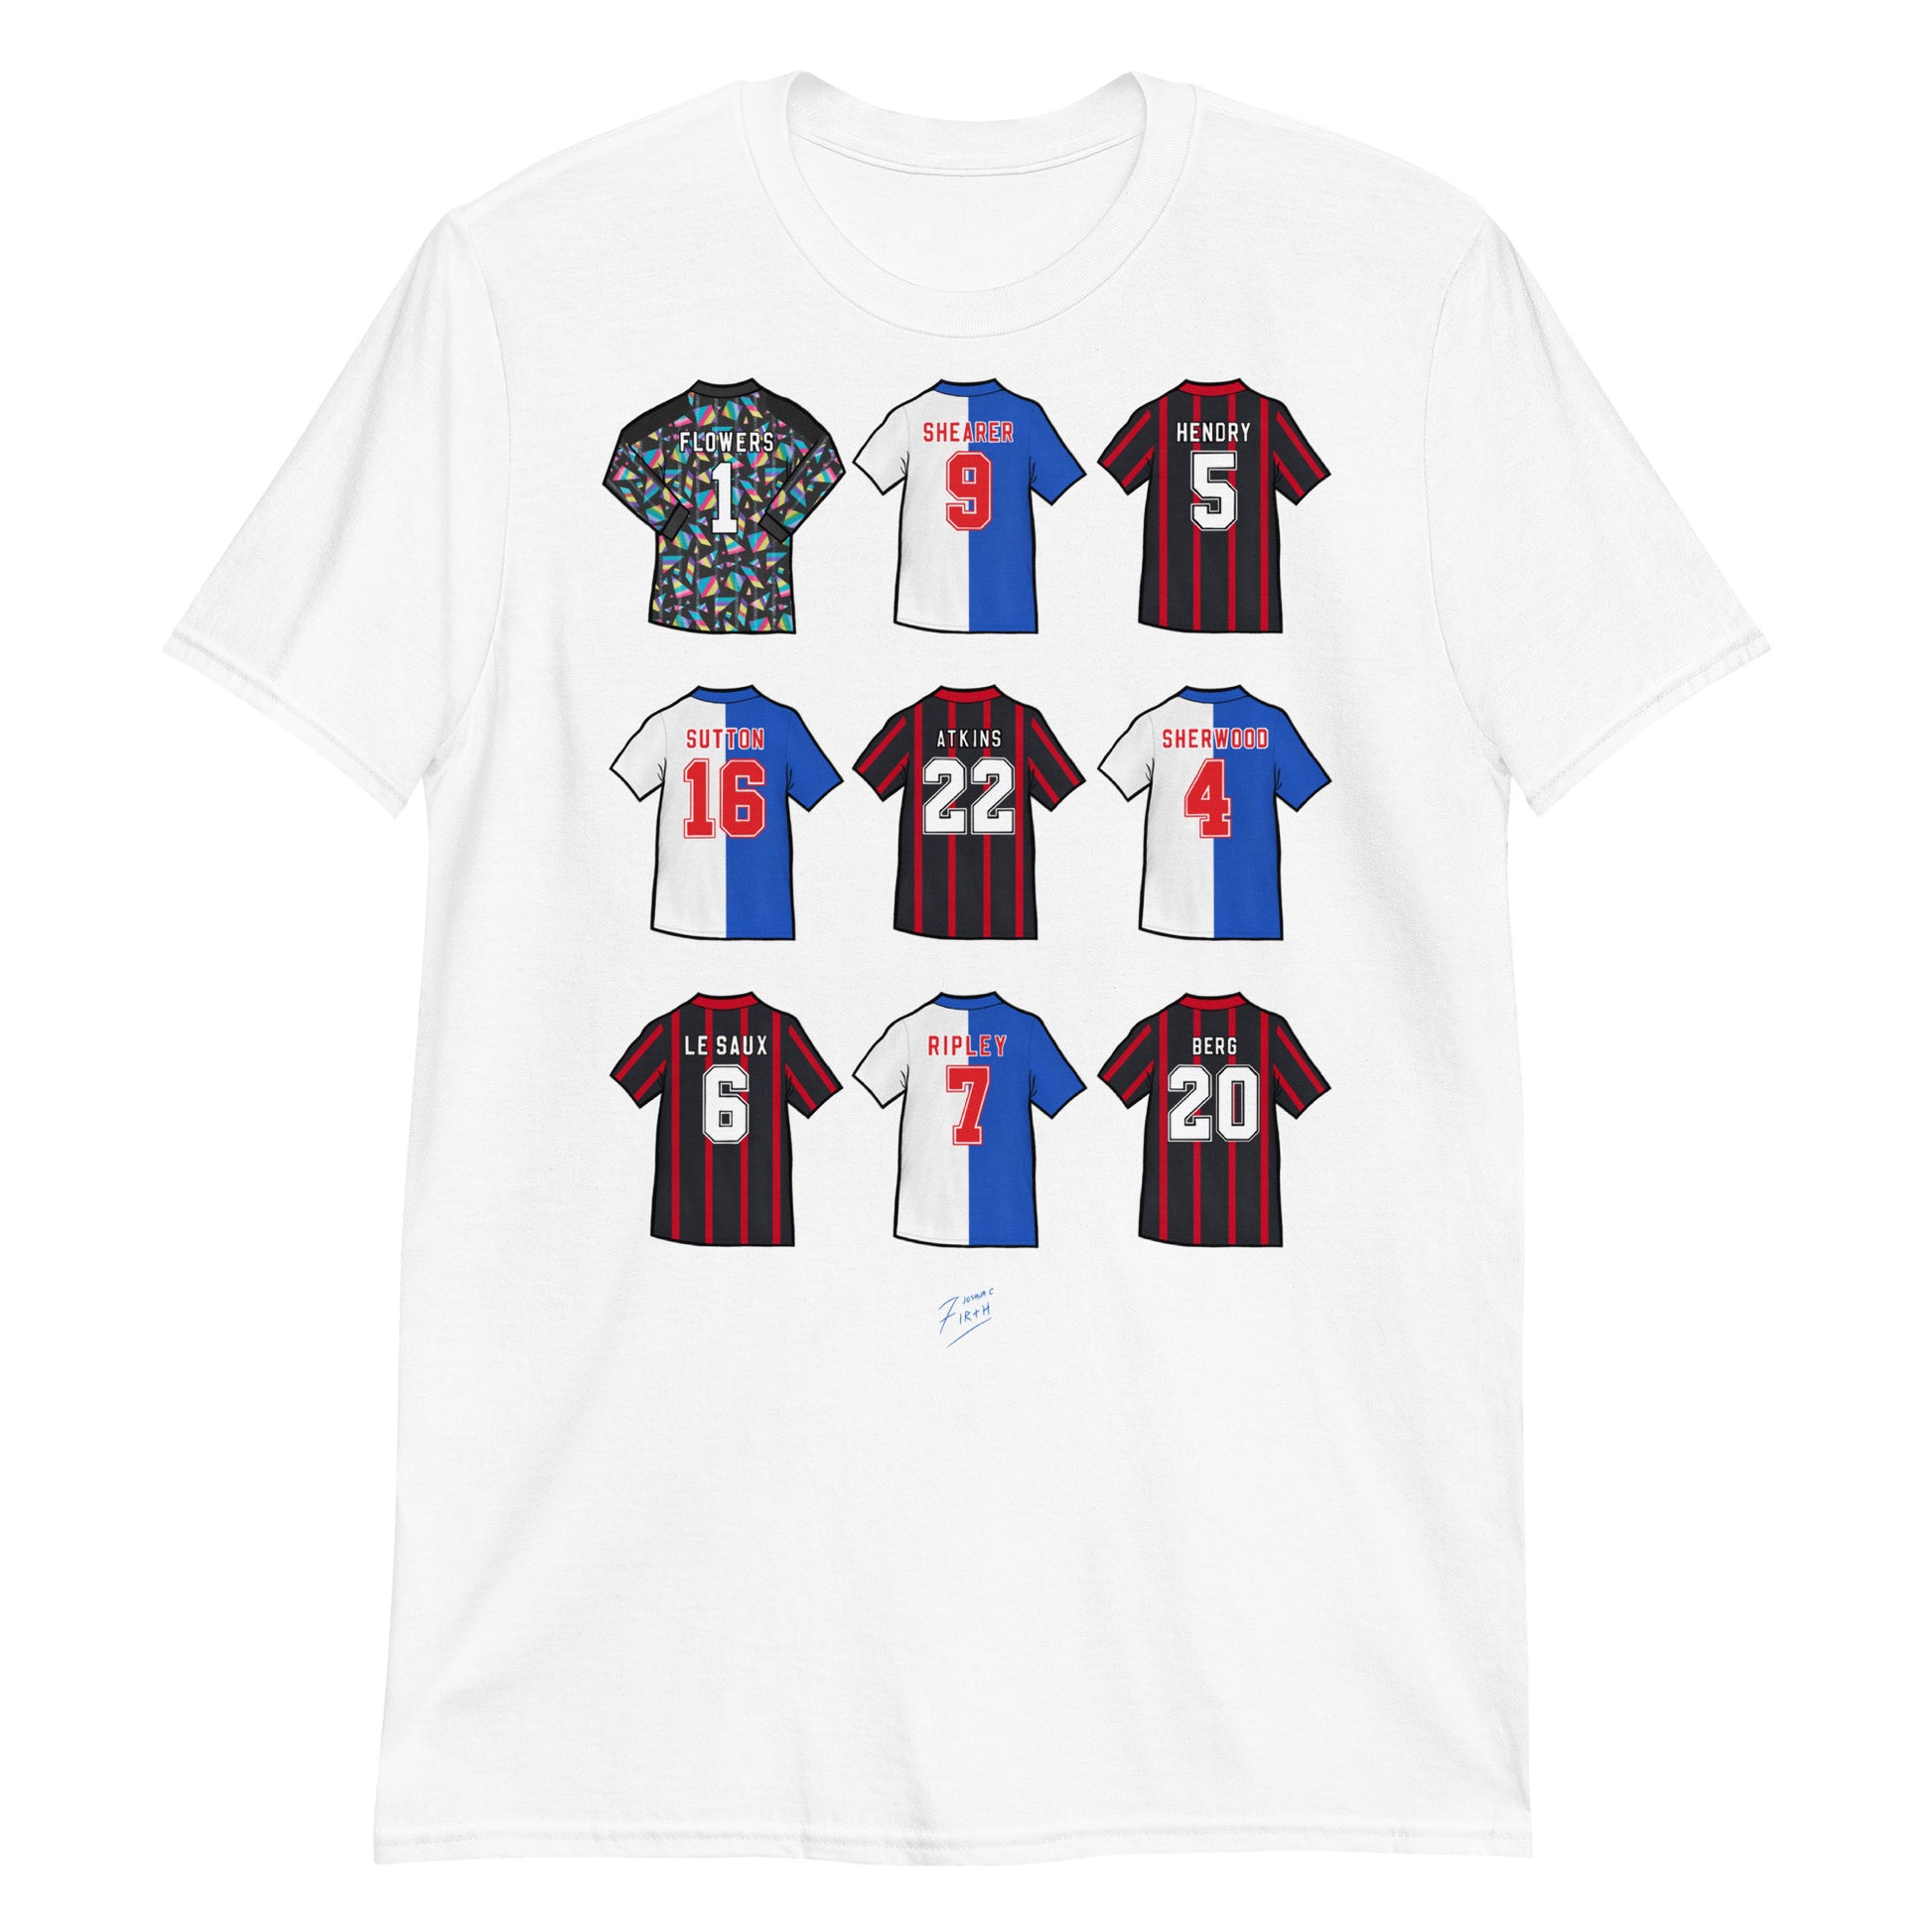 White T-shirt inspired by the legendary Blackburn Rovers players of the past! A great tribute to that team of 1994/95